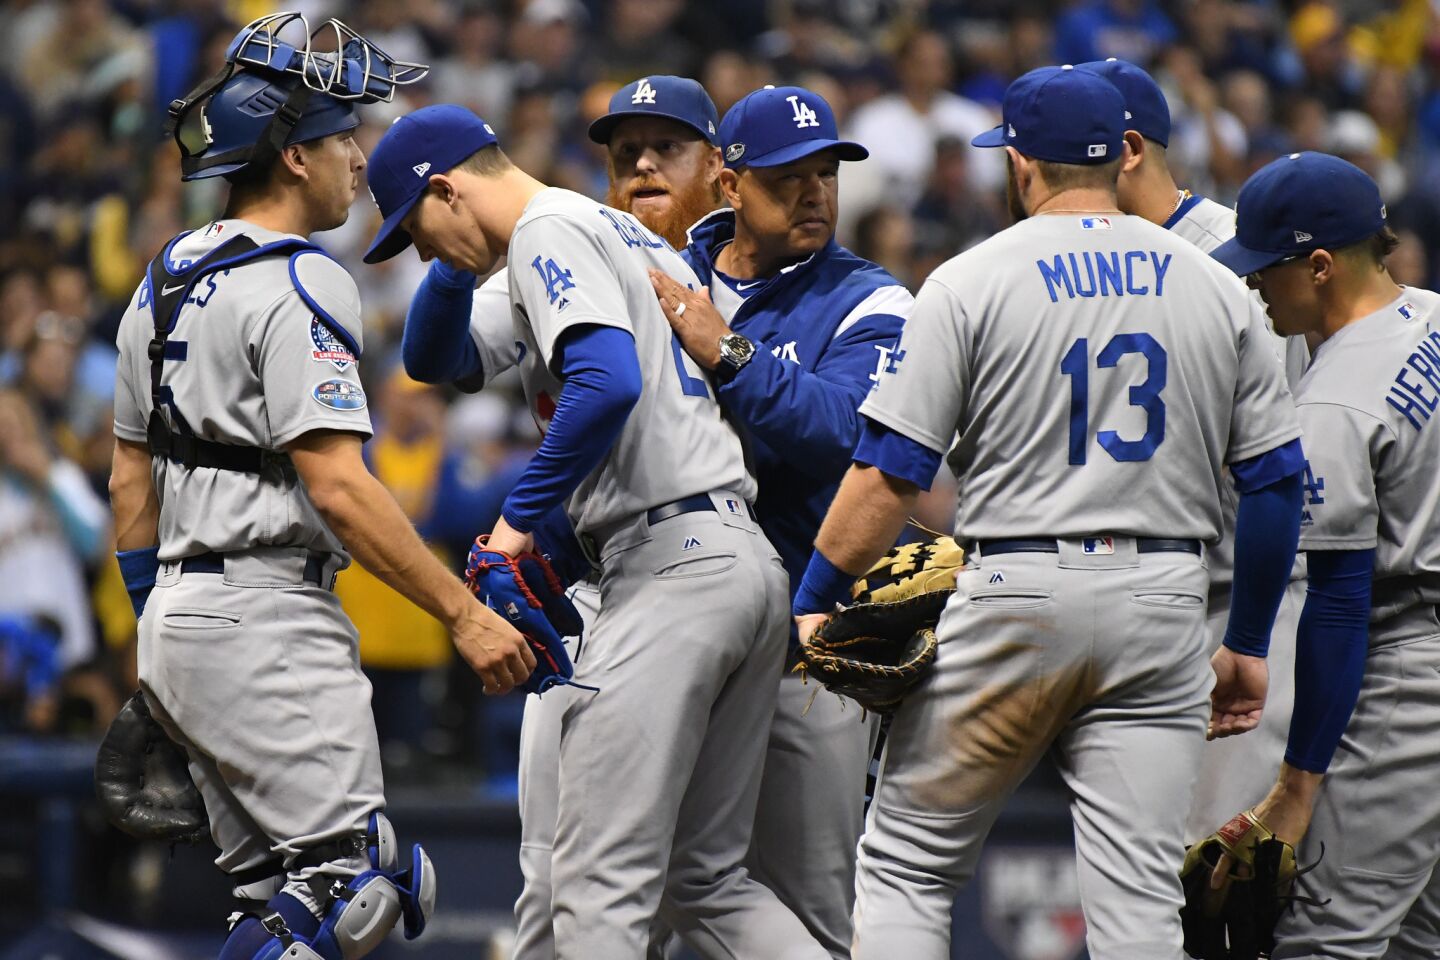 Dodgers manager Dave Roberts pats Walker Buehler after taking him out of the game in the fifth inning.